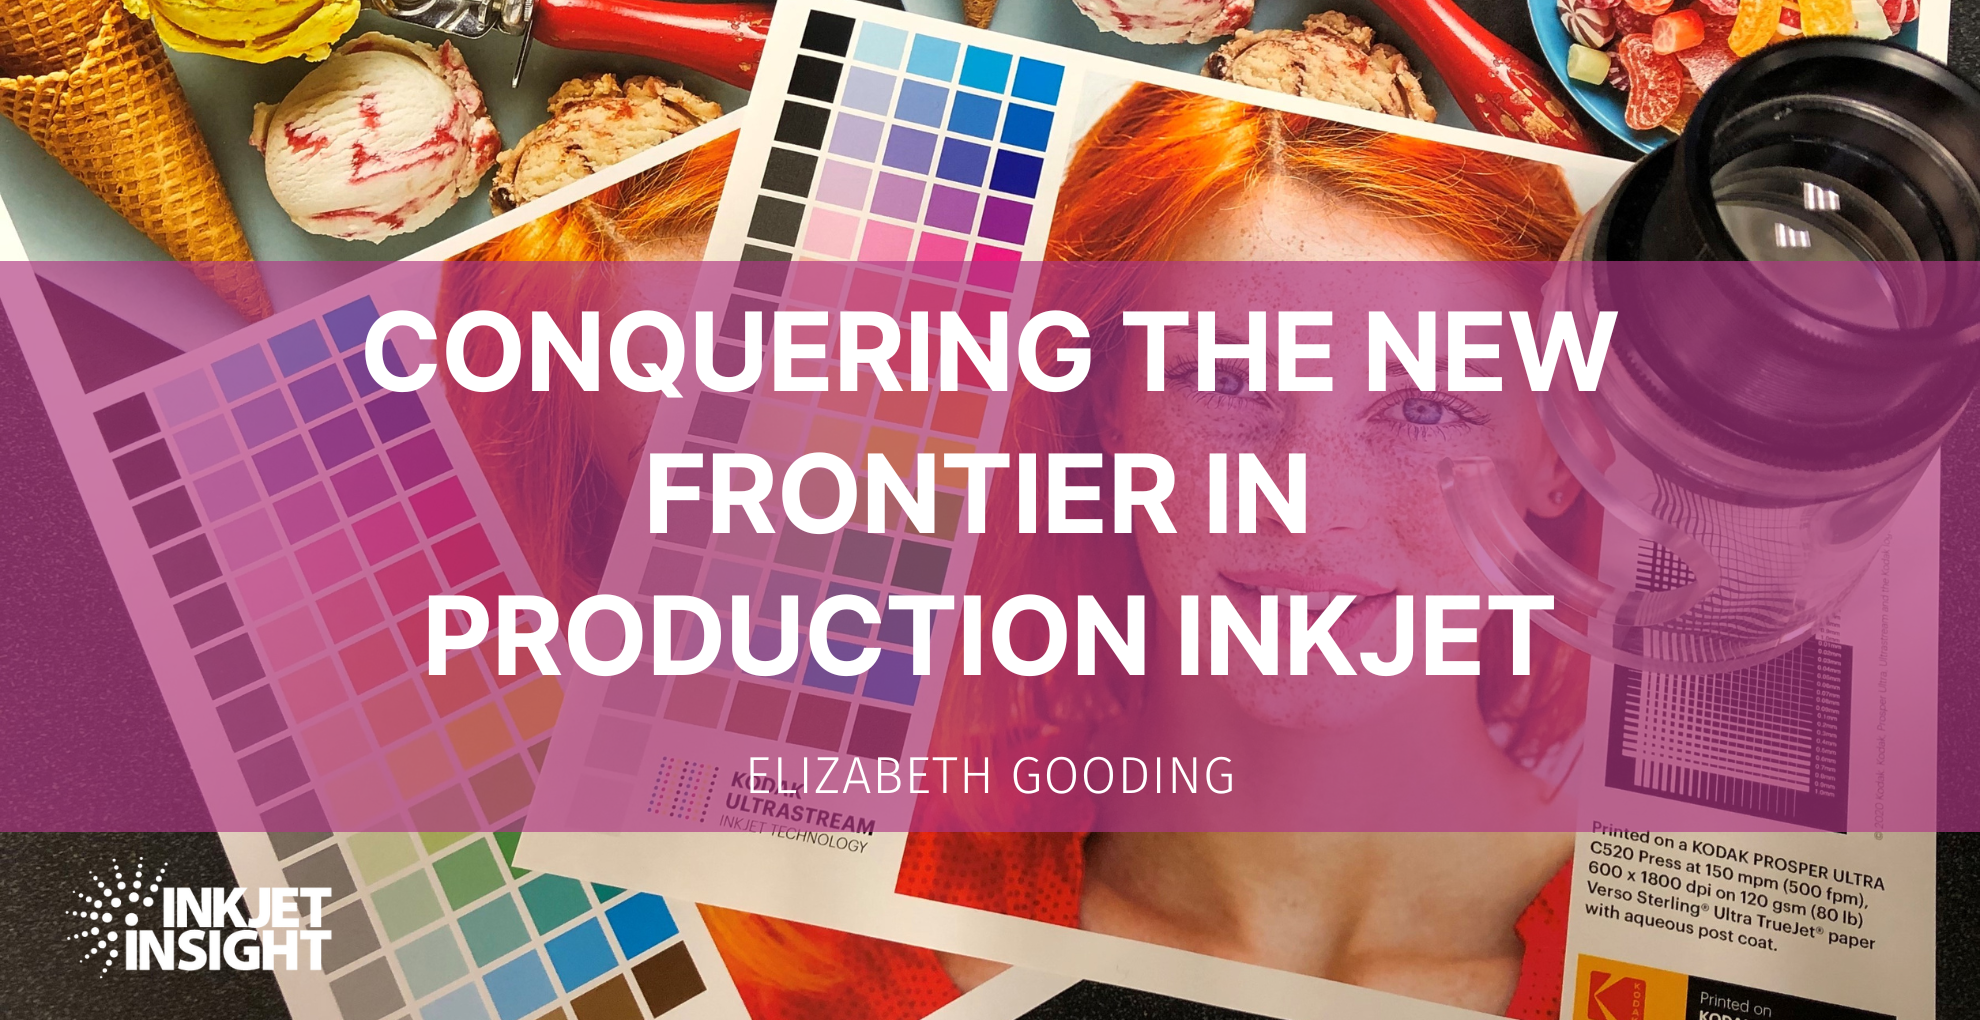 Featured image for “Conquering the New Frontier in Production Inkjet”